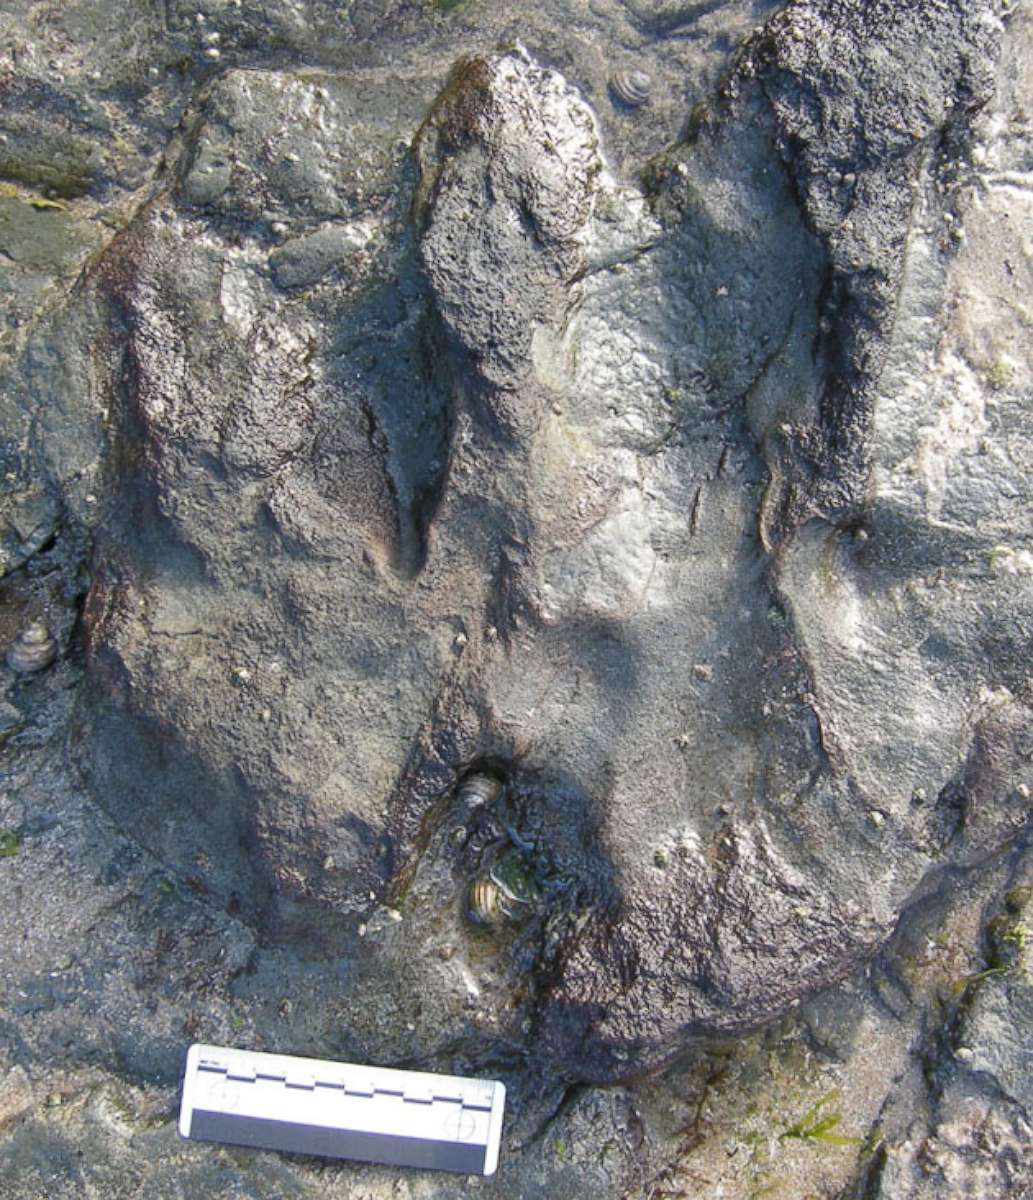 The therapod footprint as it appeared before a vandal chipped off parts of the fossil at Bunurong Marine Park in Victoria, Australia.           